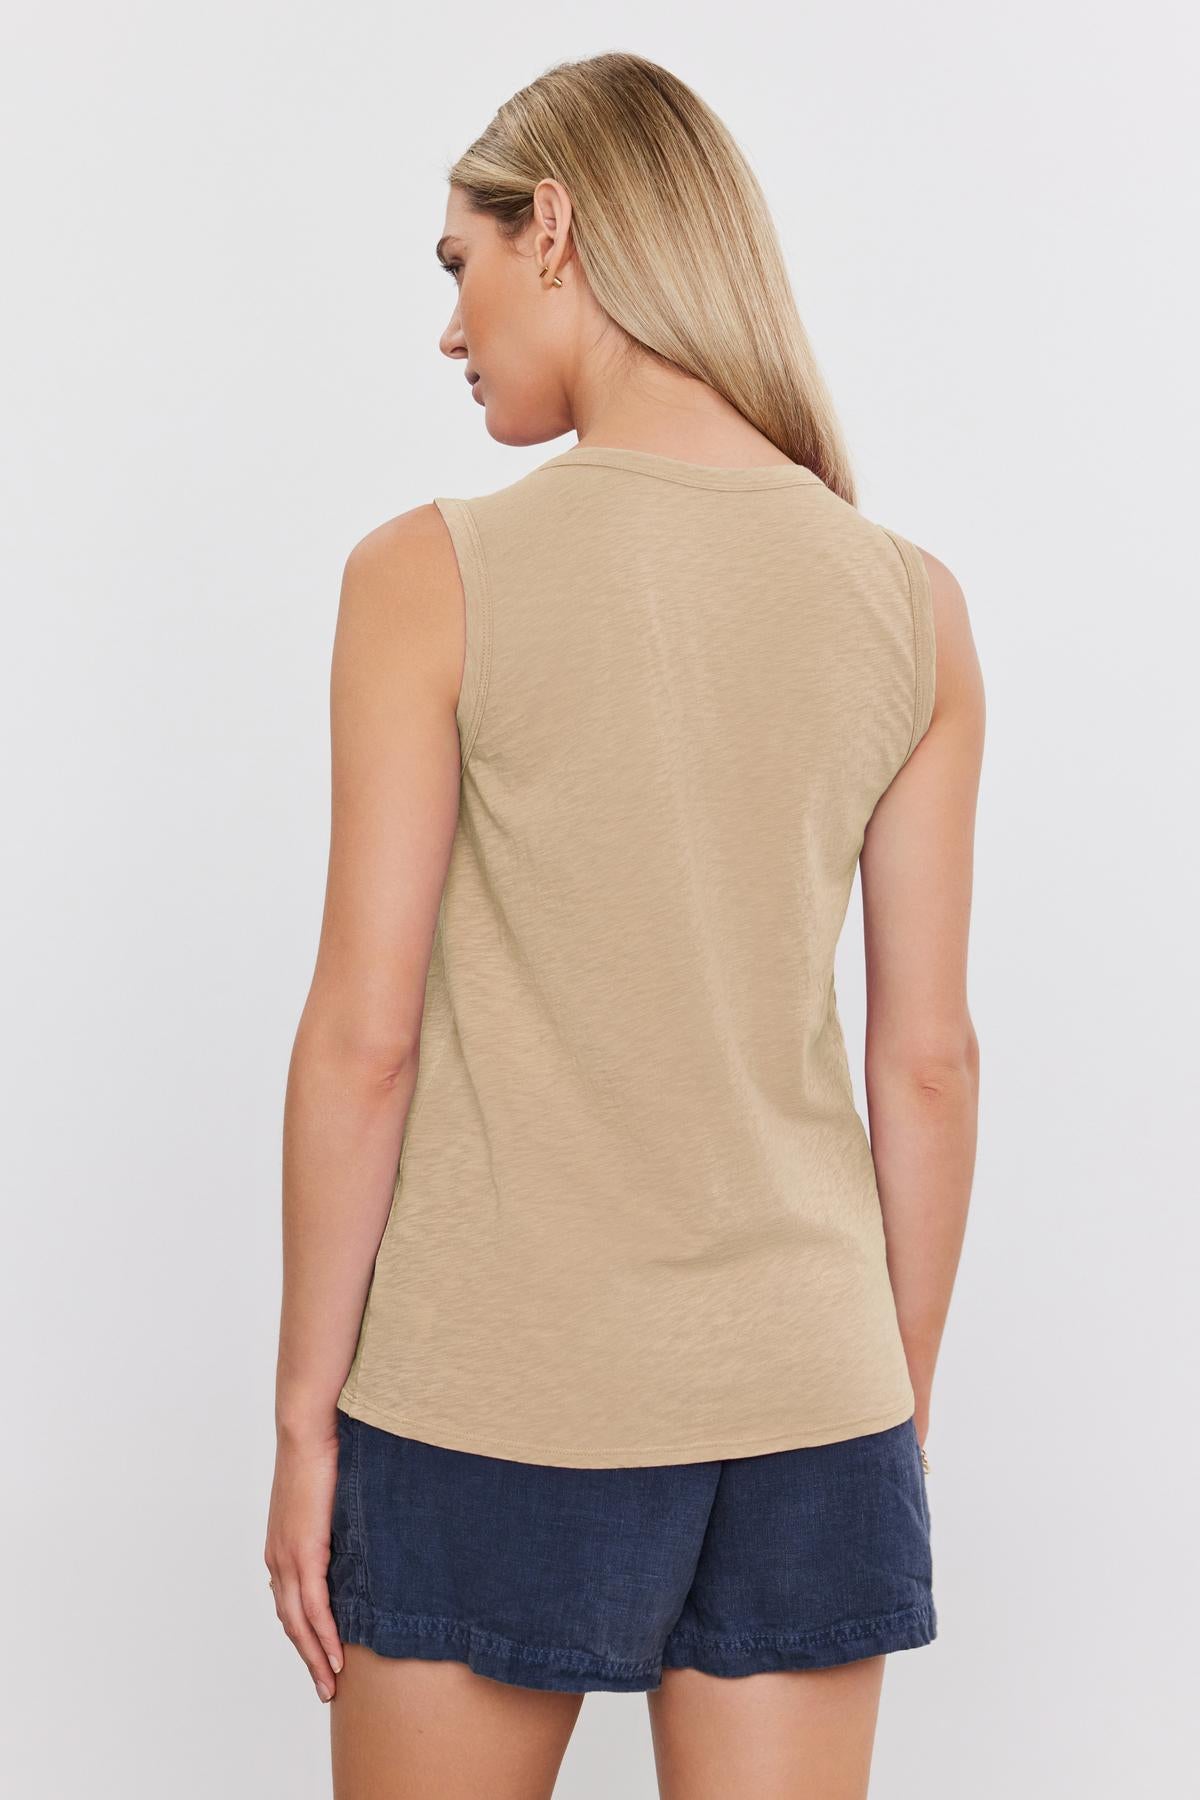   Woman wearing a beige TAURUS COTTON SLUB TANK and denim shorts, seen from the back, standing against a white background. (Brand Name: Velvet by Graham & Spencer) 